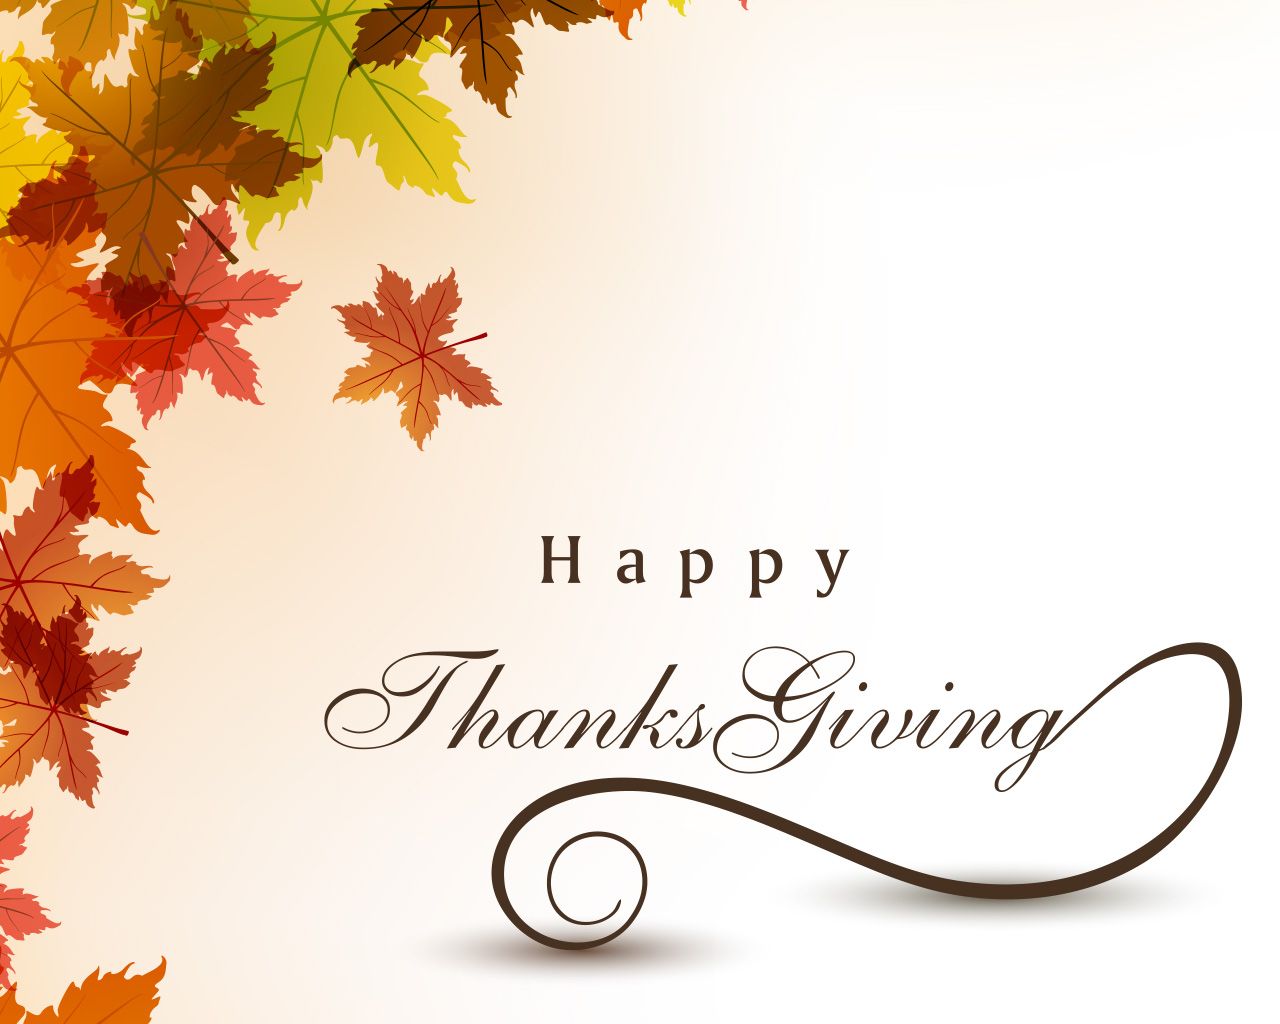 Latest Thanksgiving Wallpapers 2013 | Online Magazine for ...